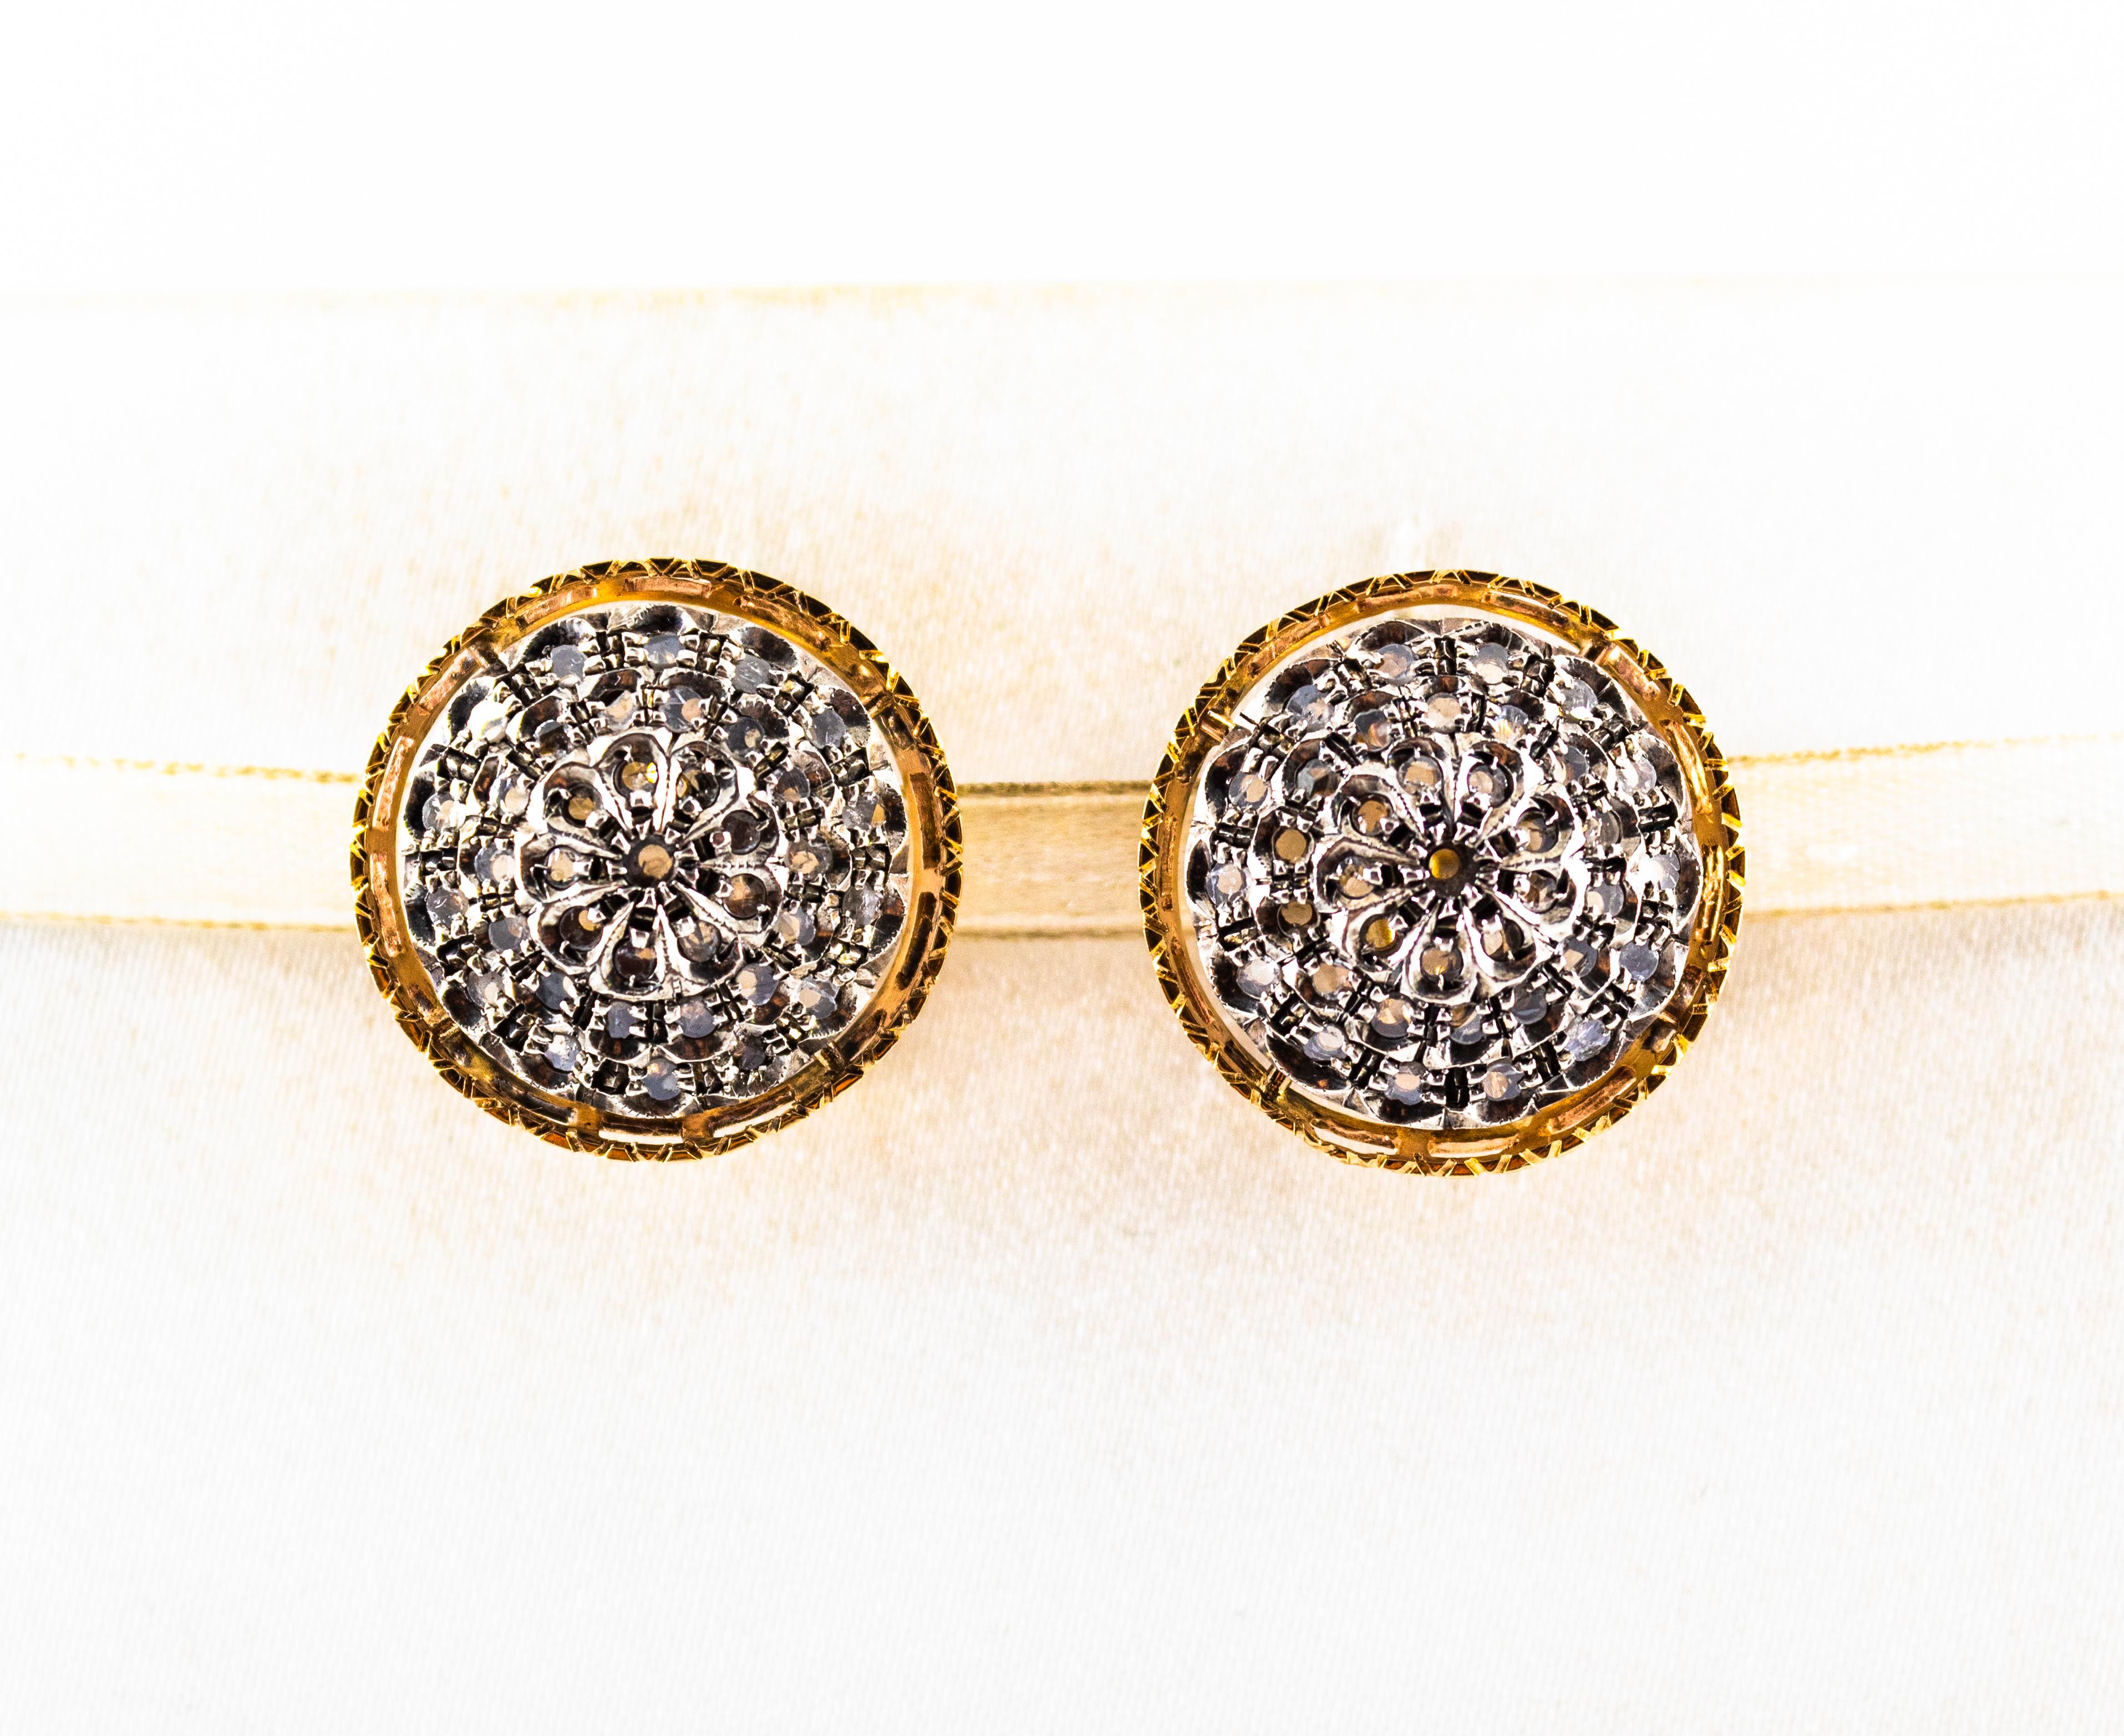 These Earrings are made of 9K Yellow Gold and Sterling Silver.
These Earrings have 0.85 Carats of White Rose Cut Diamonds.

All our Earrings have pins for pierced ears but we can change the closure and make any of our Earrings suitable even for